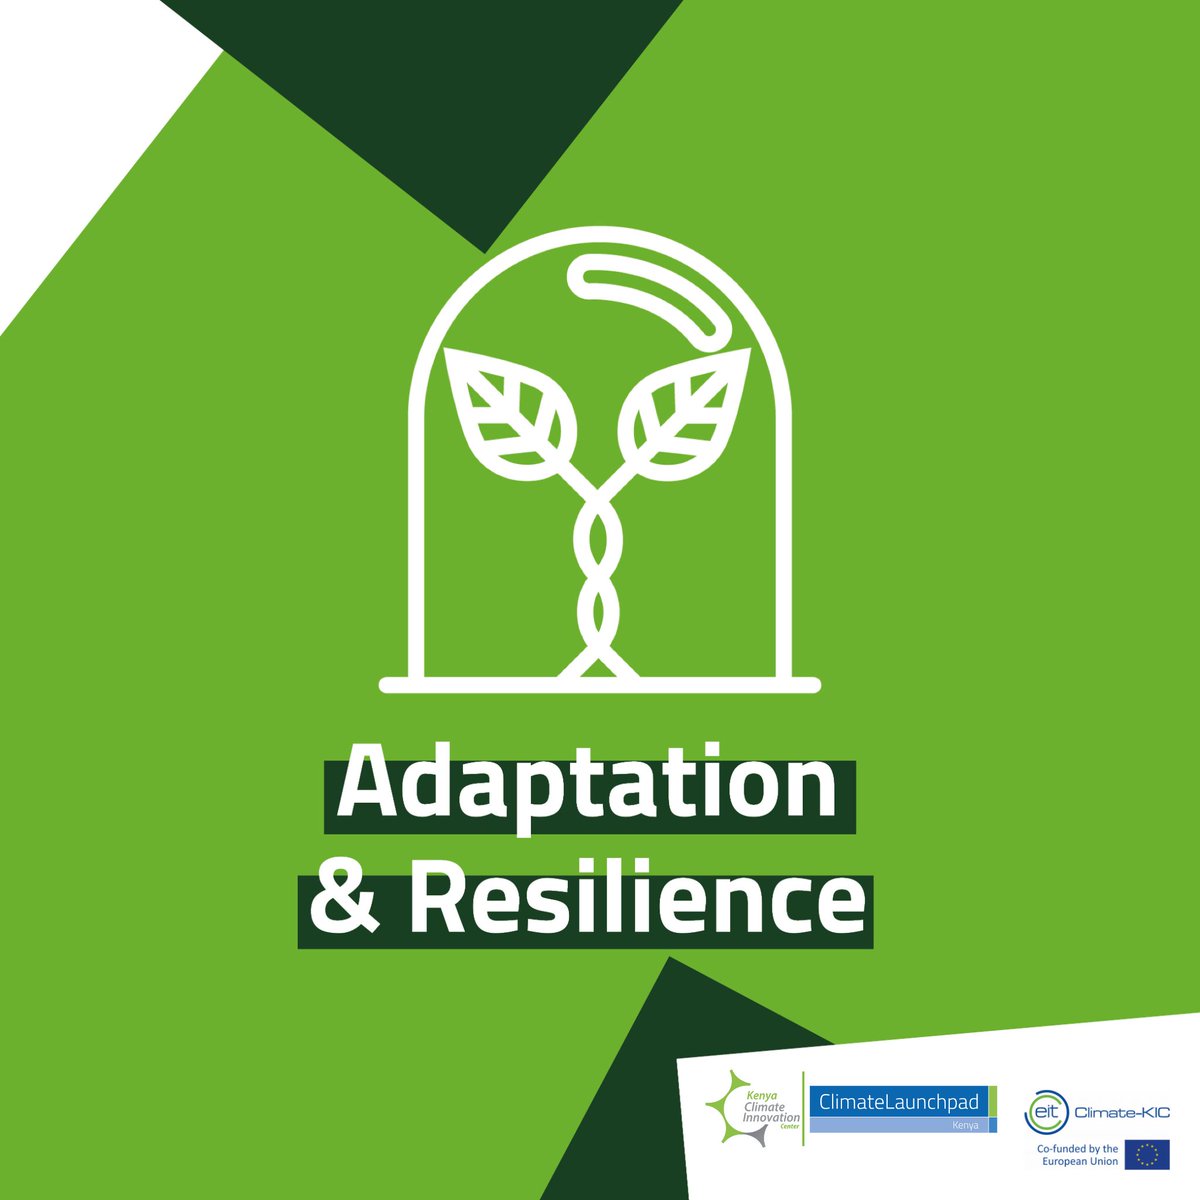 Climate change creates worldwide challenges. Some regions, communities, and ecosystems are particularly vulnerable to climate volatility. That’s why Adaptation & Resilience is one of our 8 themes in the #ClimateLaunchpad competition. This theme focuses on ideas that provide…